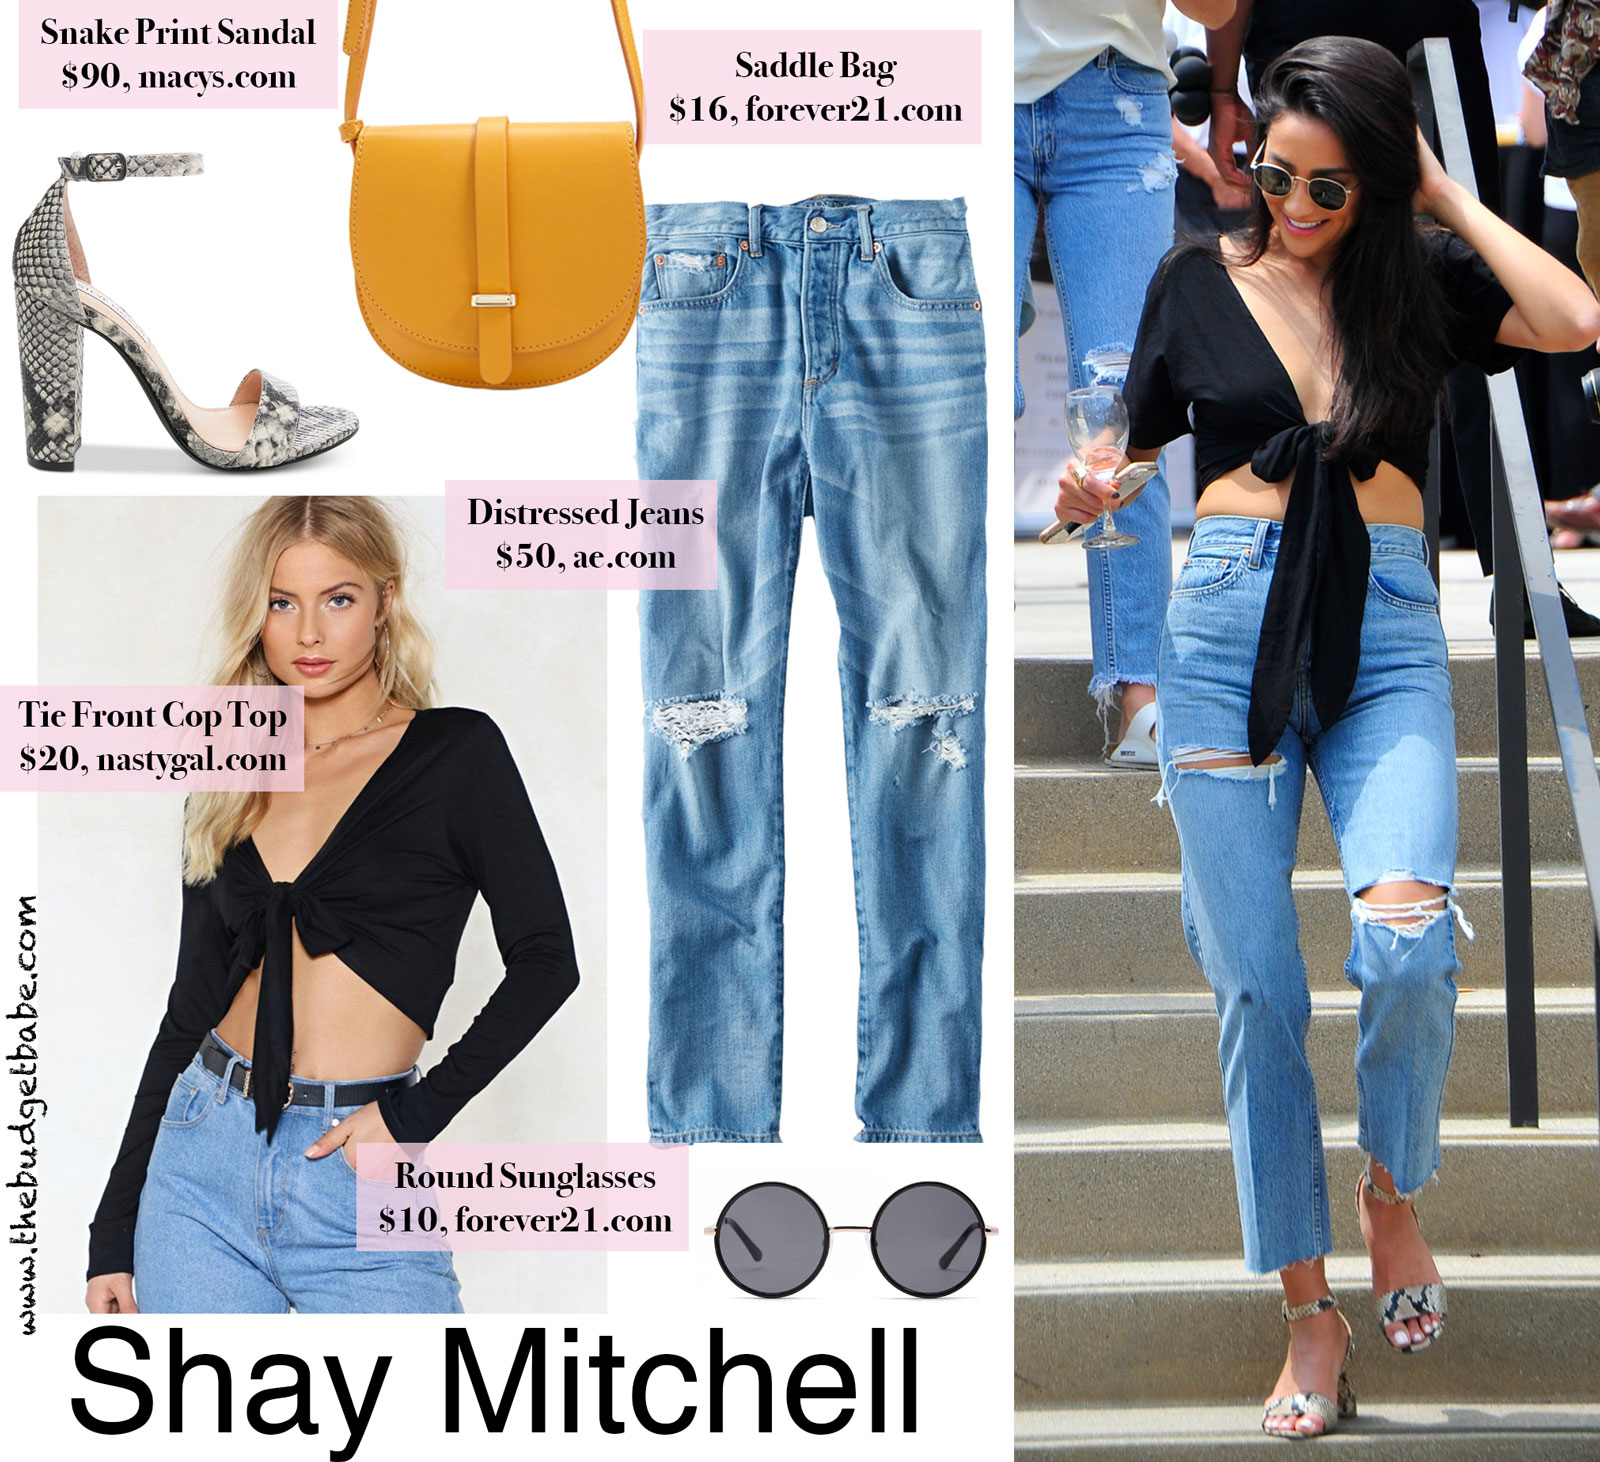 Shay Mitchell Tie Crop Top and Snake Print Heels Look for Less